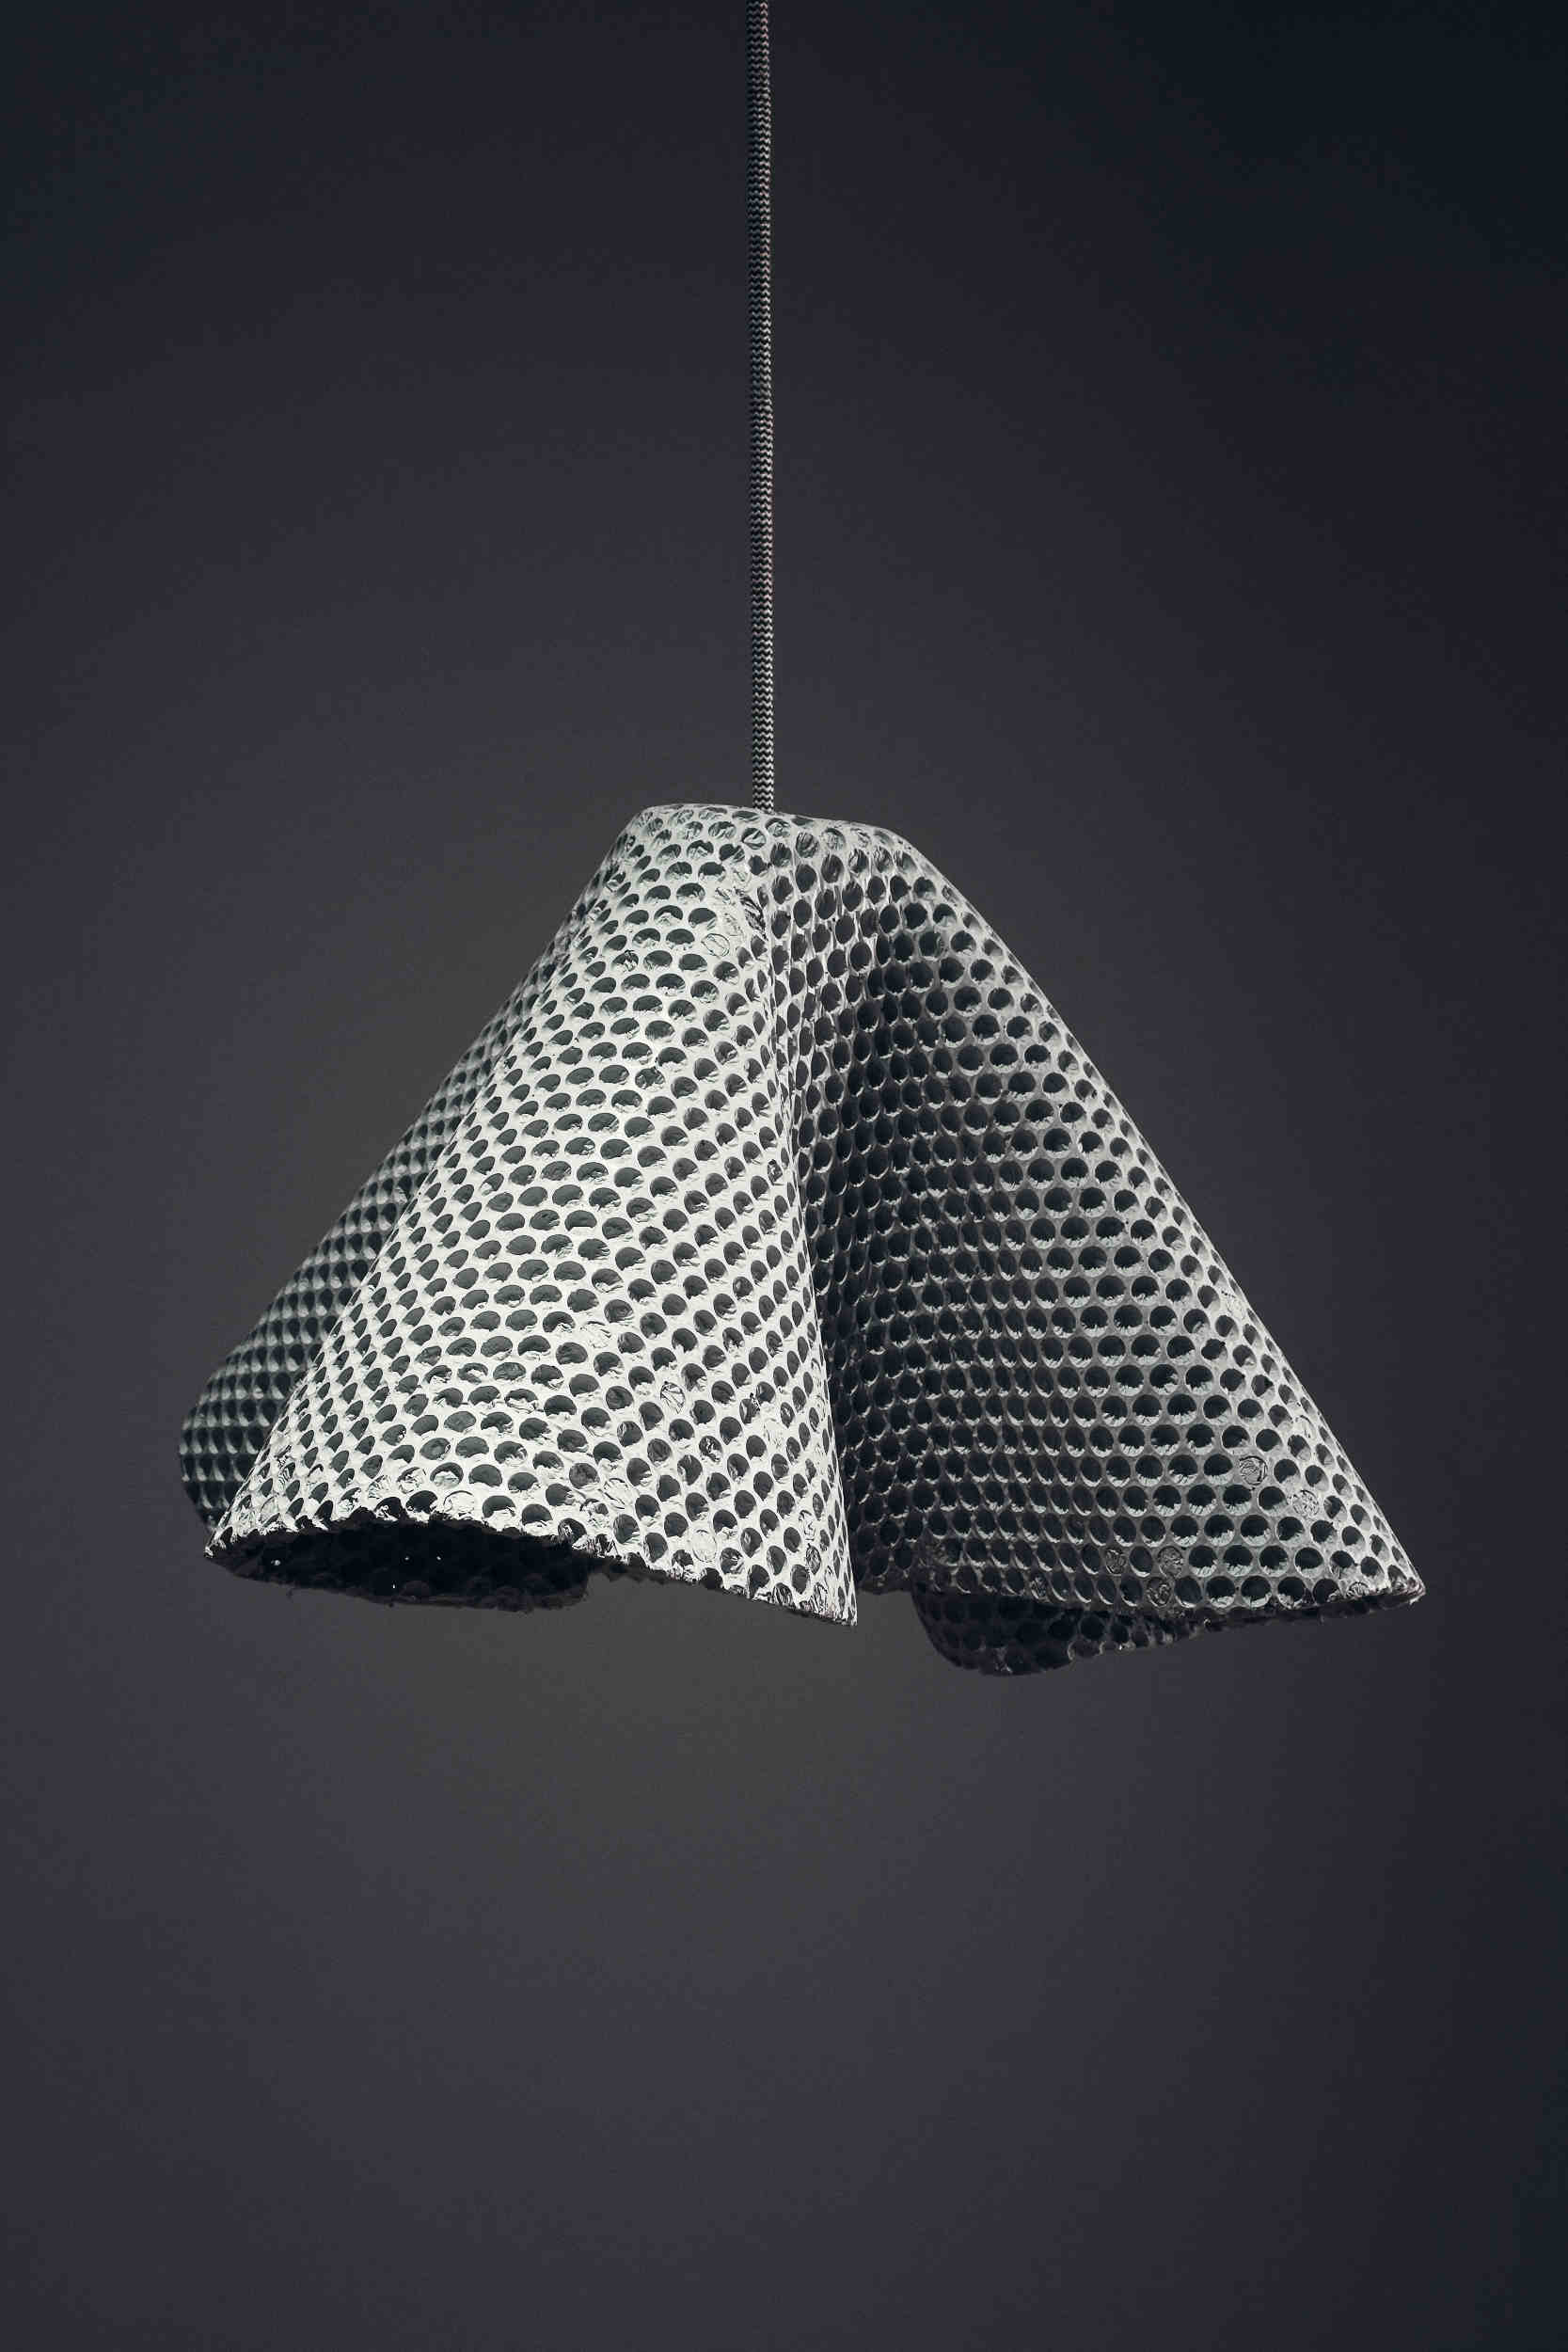 Design objects by Butong